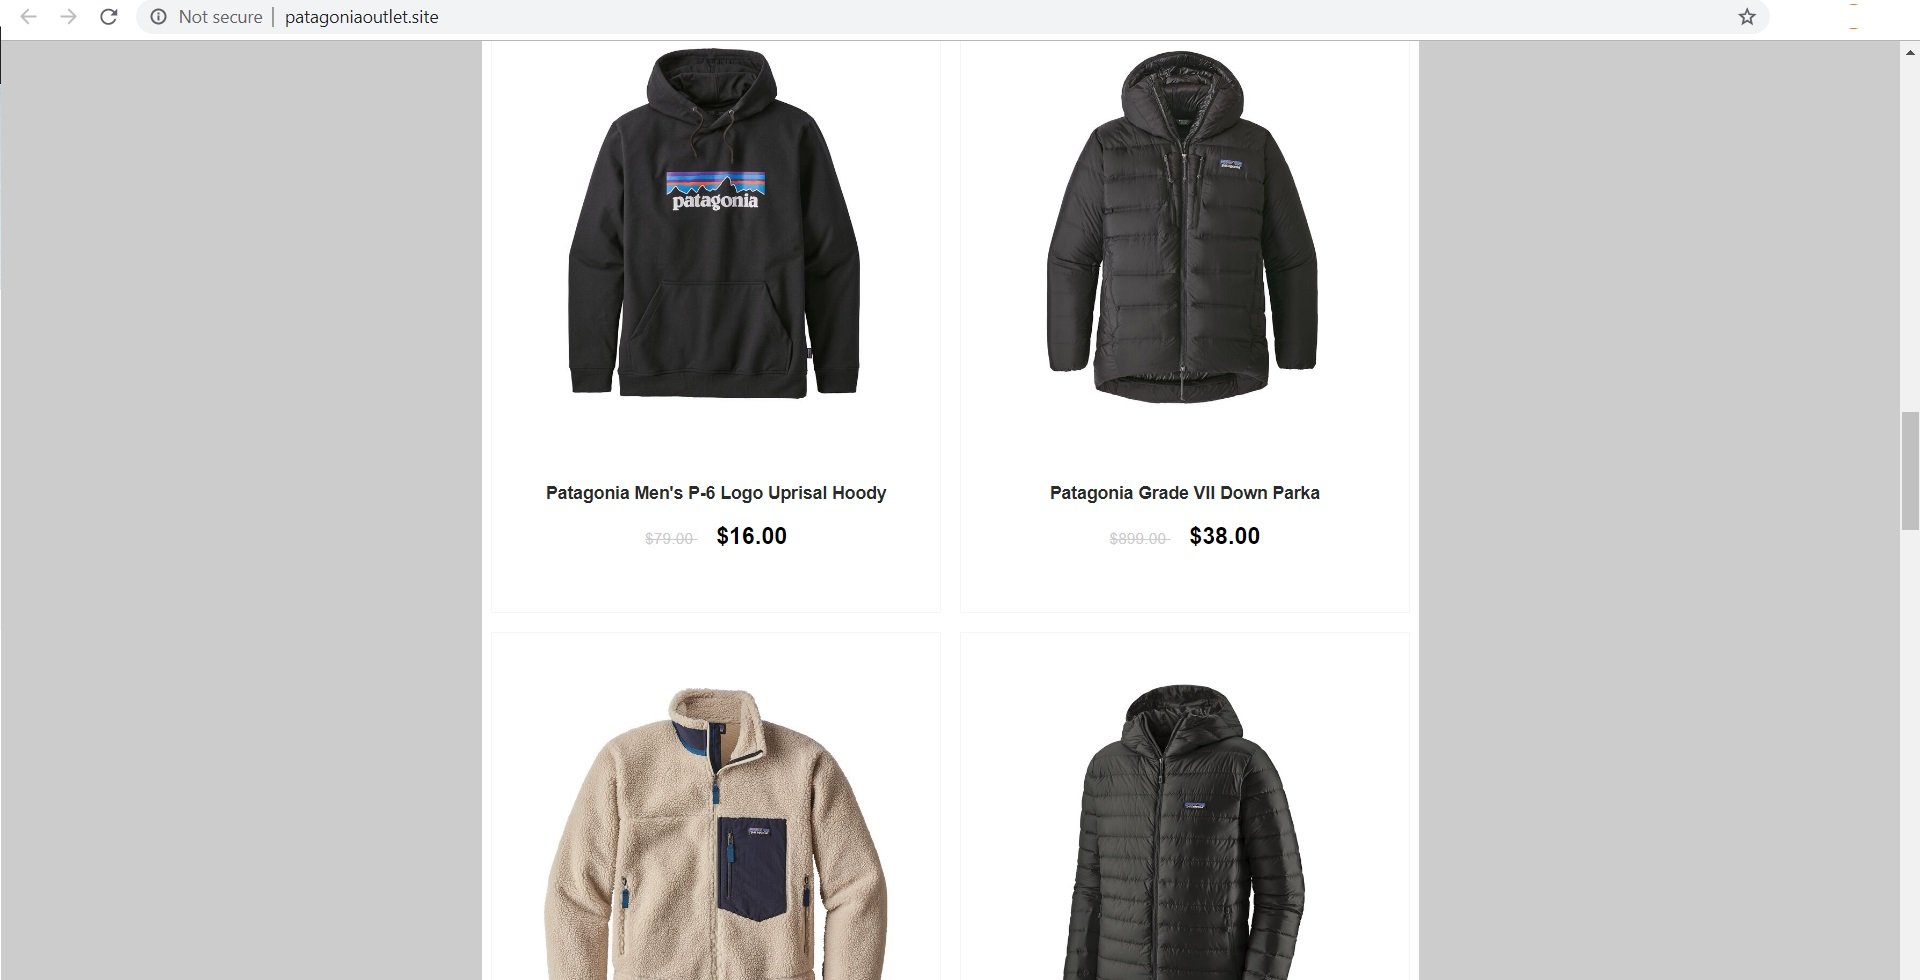 Patagonia Outlet Site Scam - Beware of the Fake Store